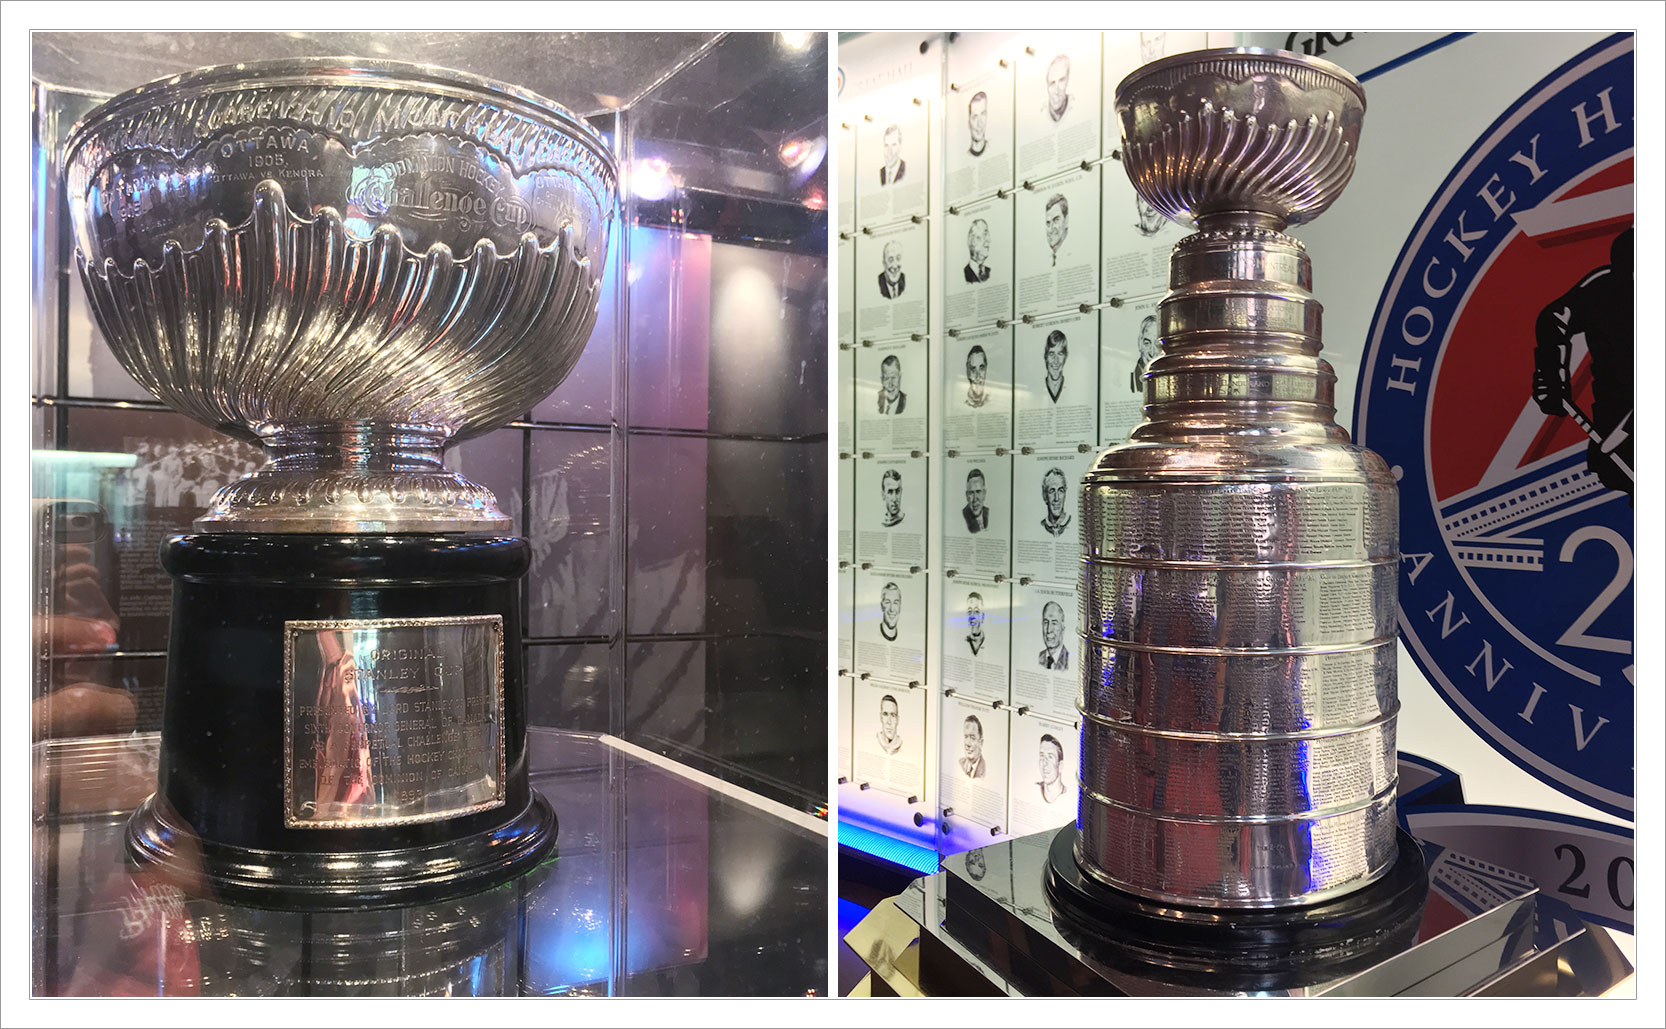 Stanley Cup replica, trophies and awards